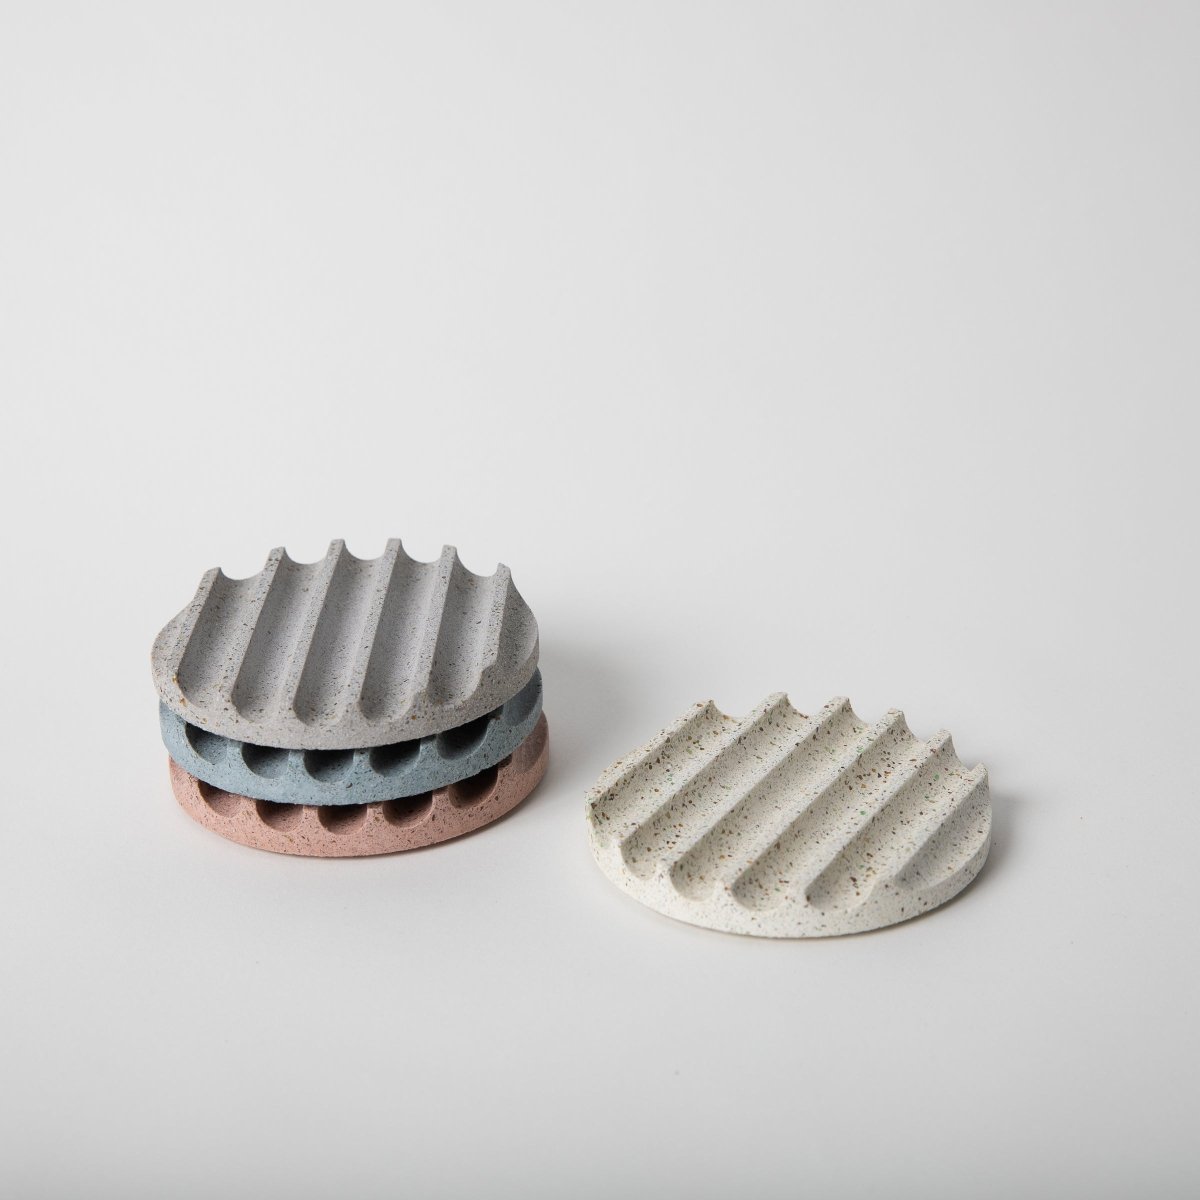 Esselle Solis Eco-Resin Polymer Coaster Set - lily & onyx